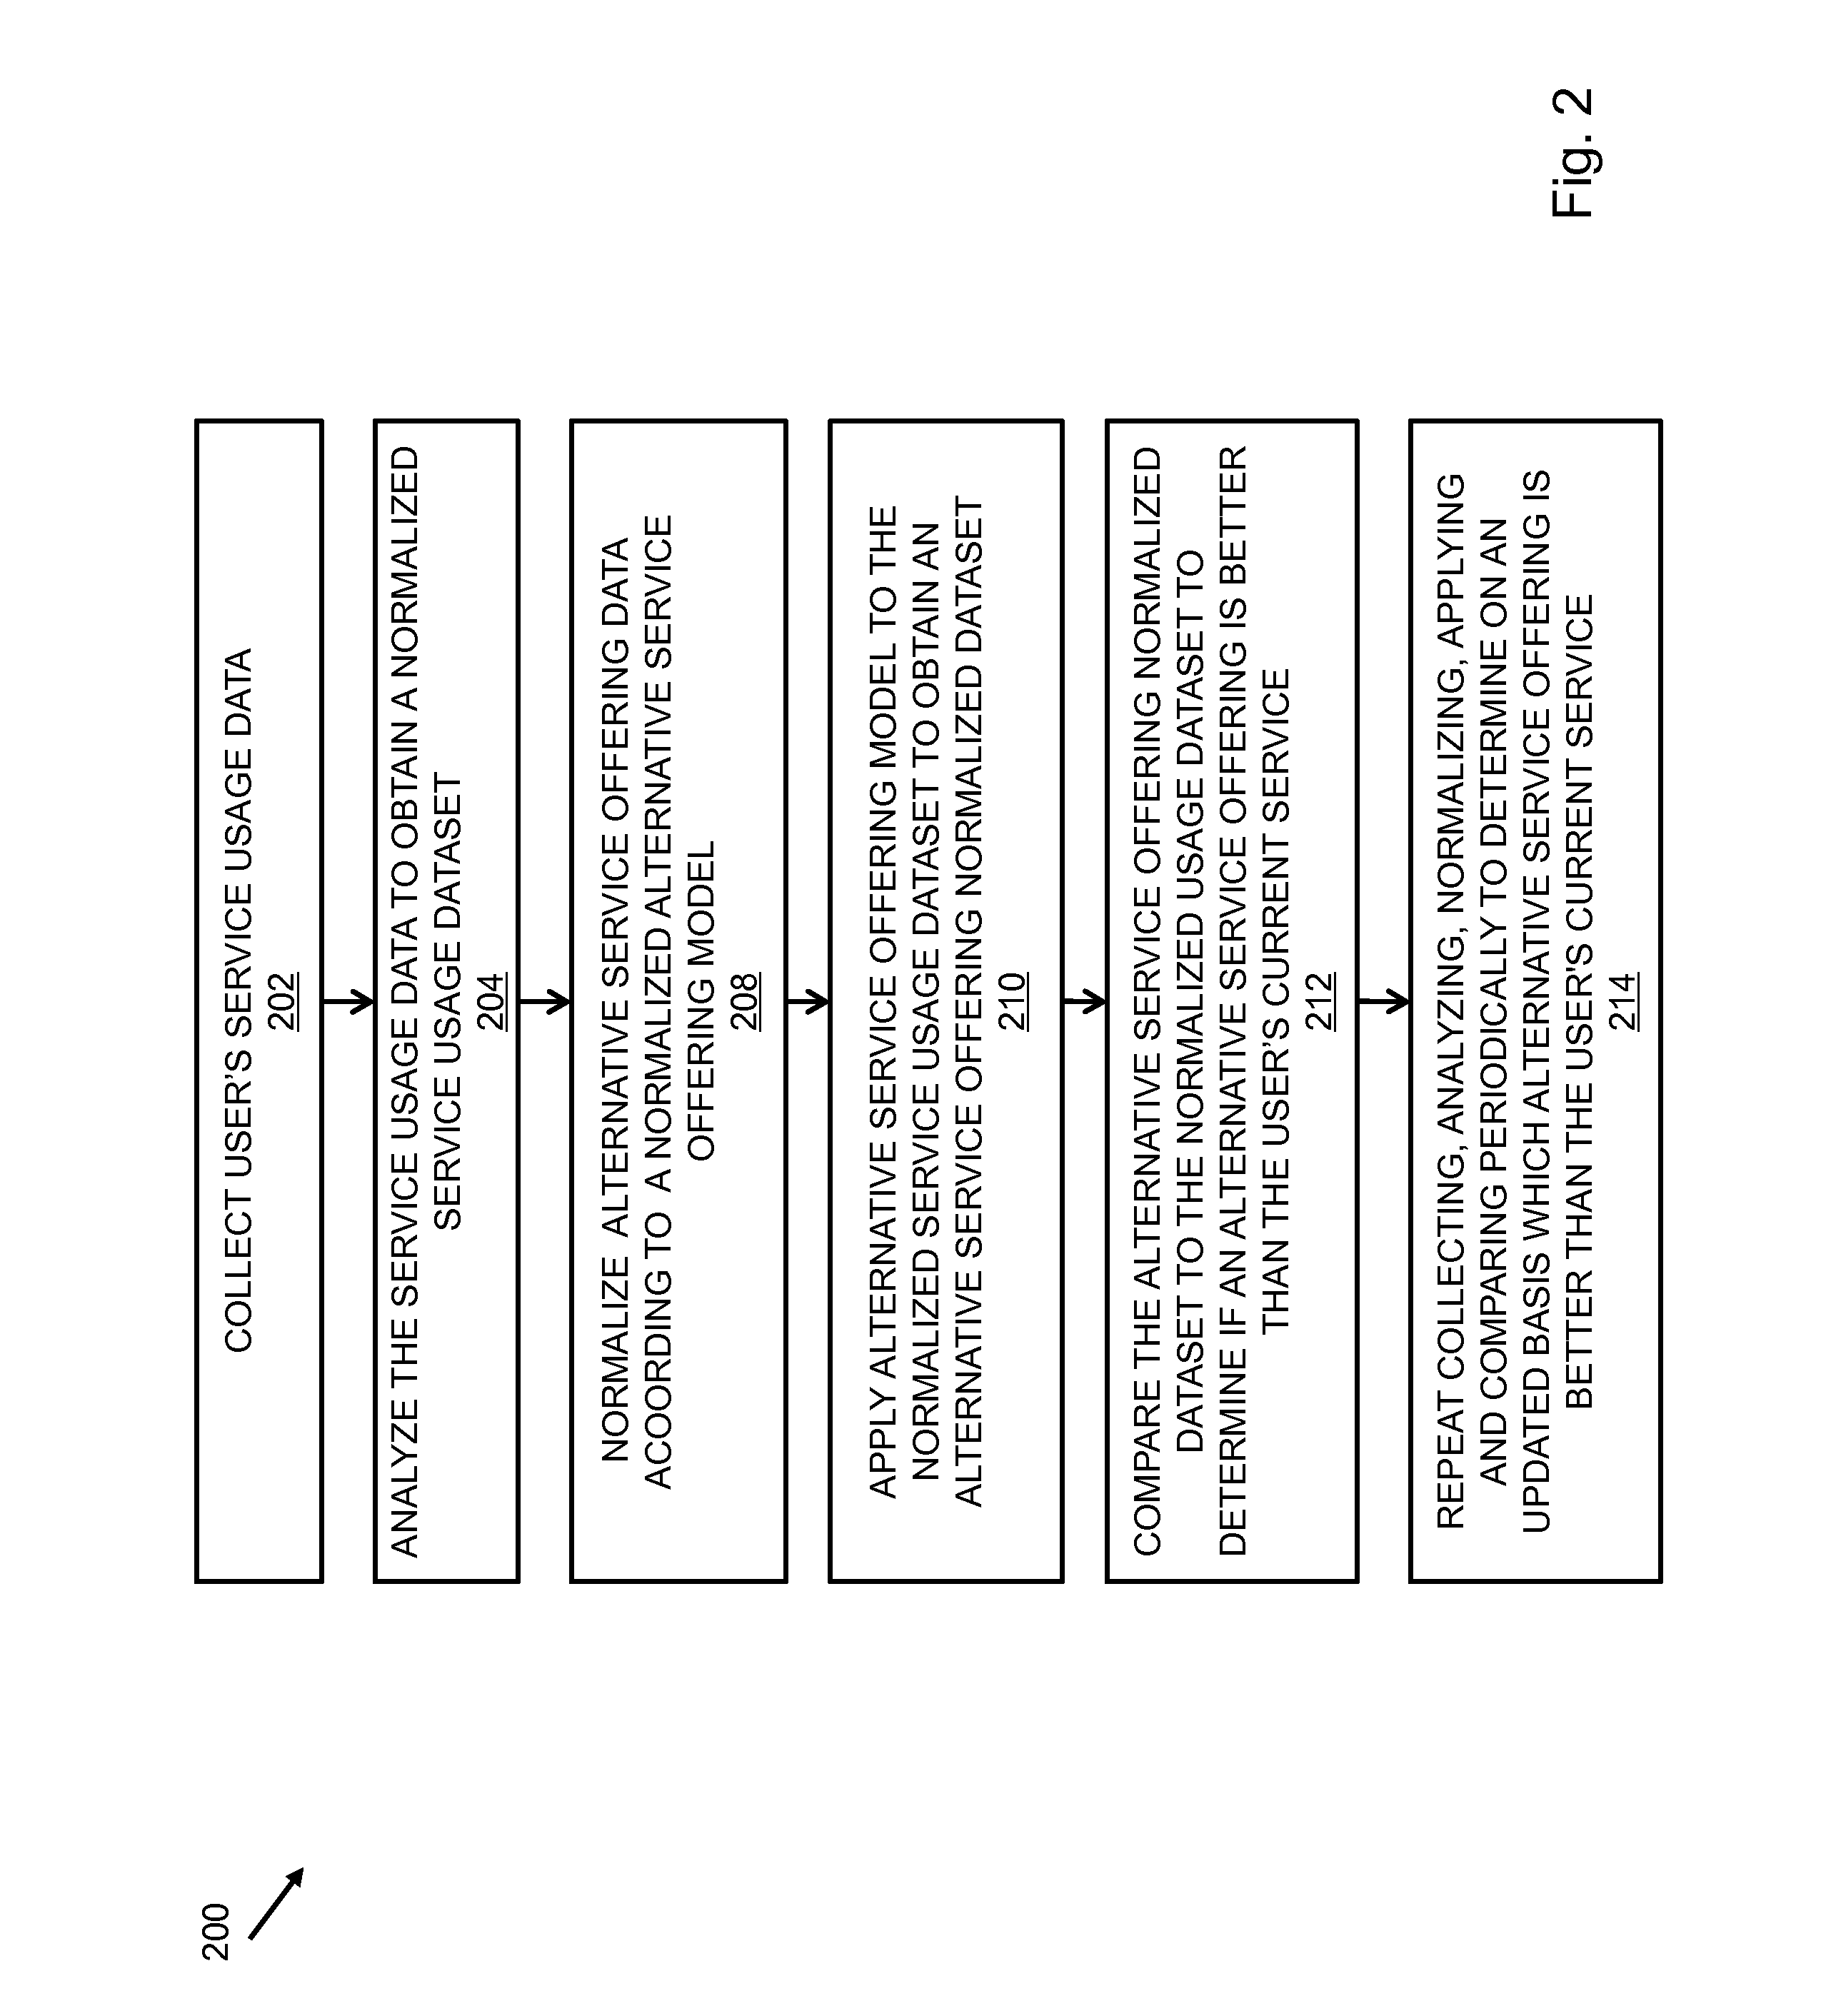 System and method of classifying financial transactions by usage patterns of a user